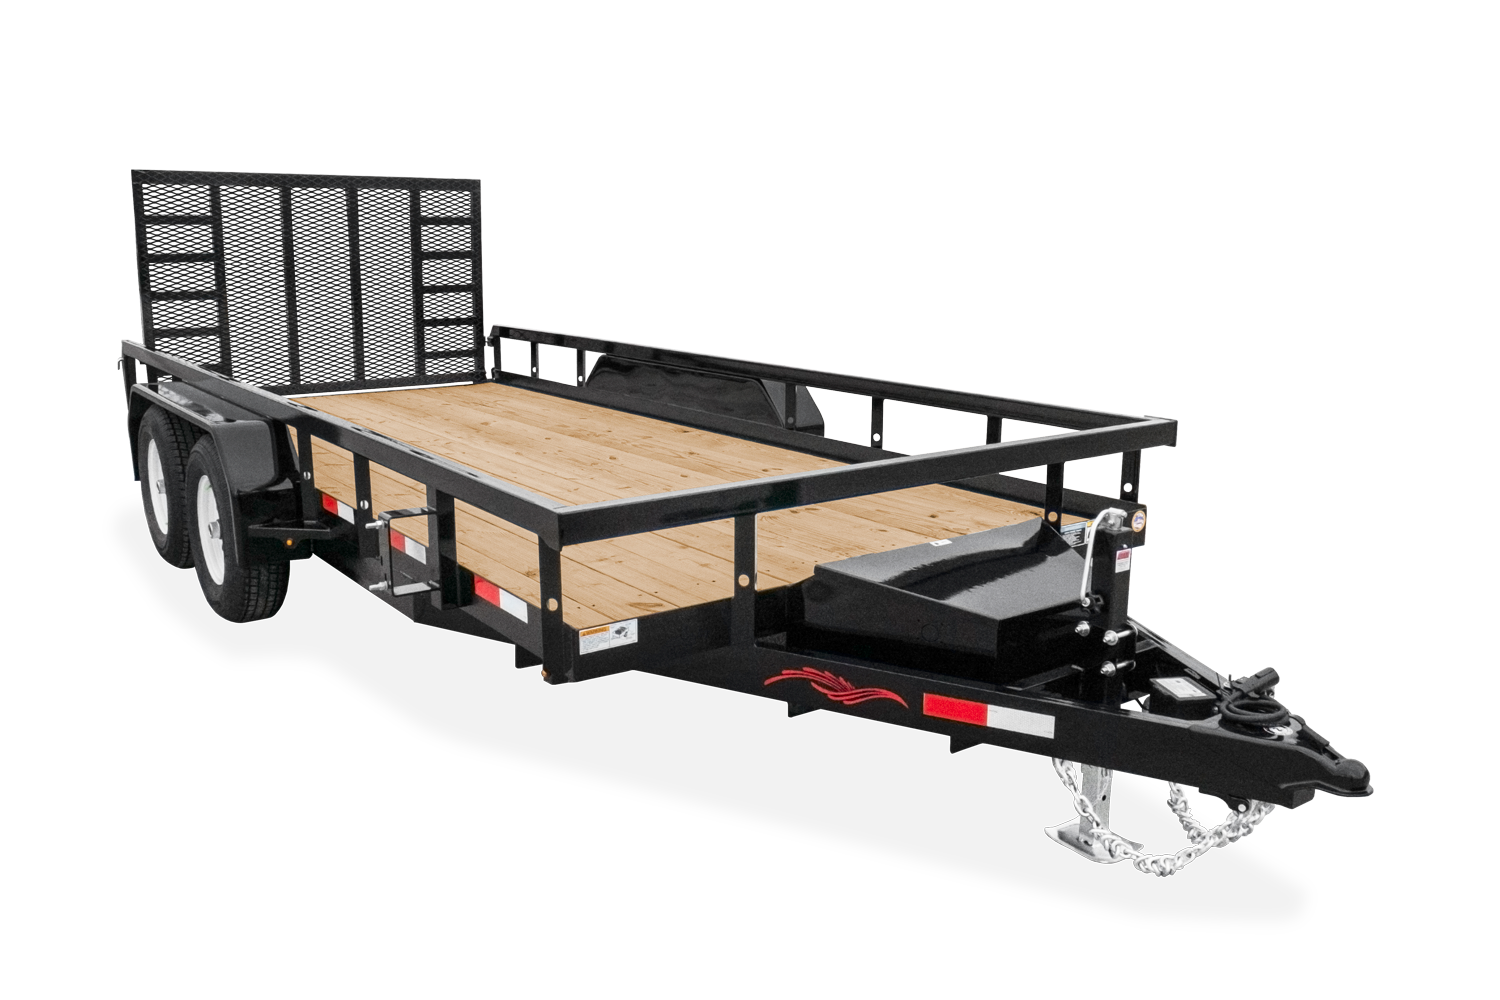 Trailerman | Tube Top Heavy Duty Tandem Axle Utility Trailer | Image | TM HD Tube Top, Front Hero, shown with optional toolbox